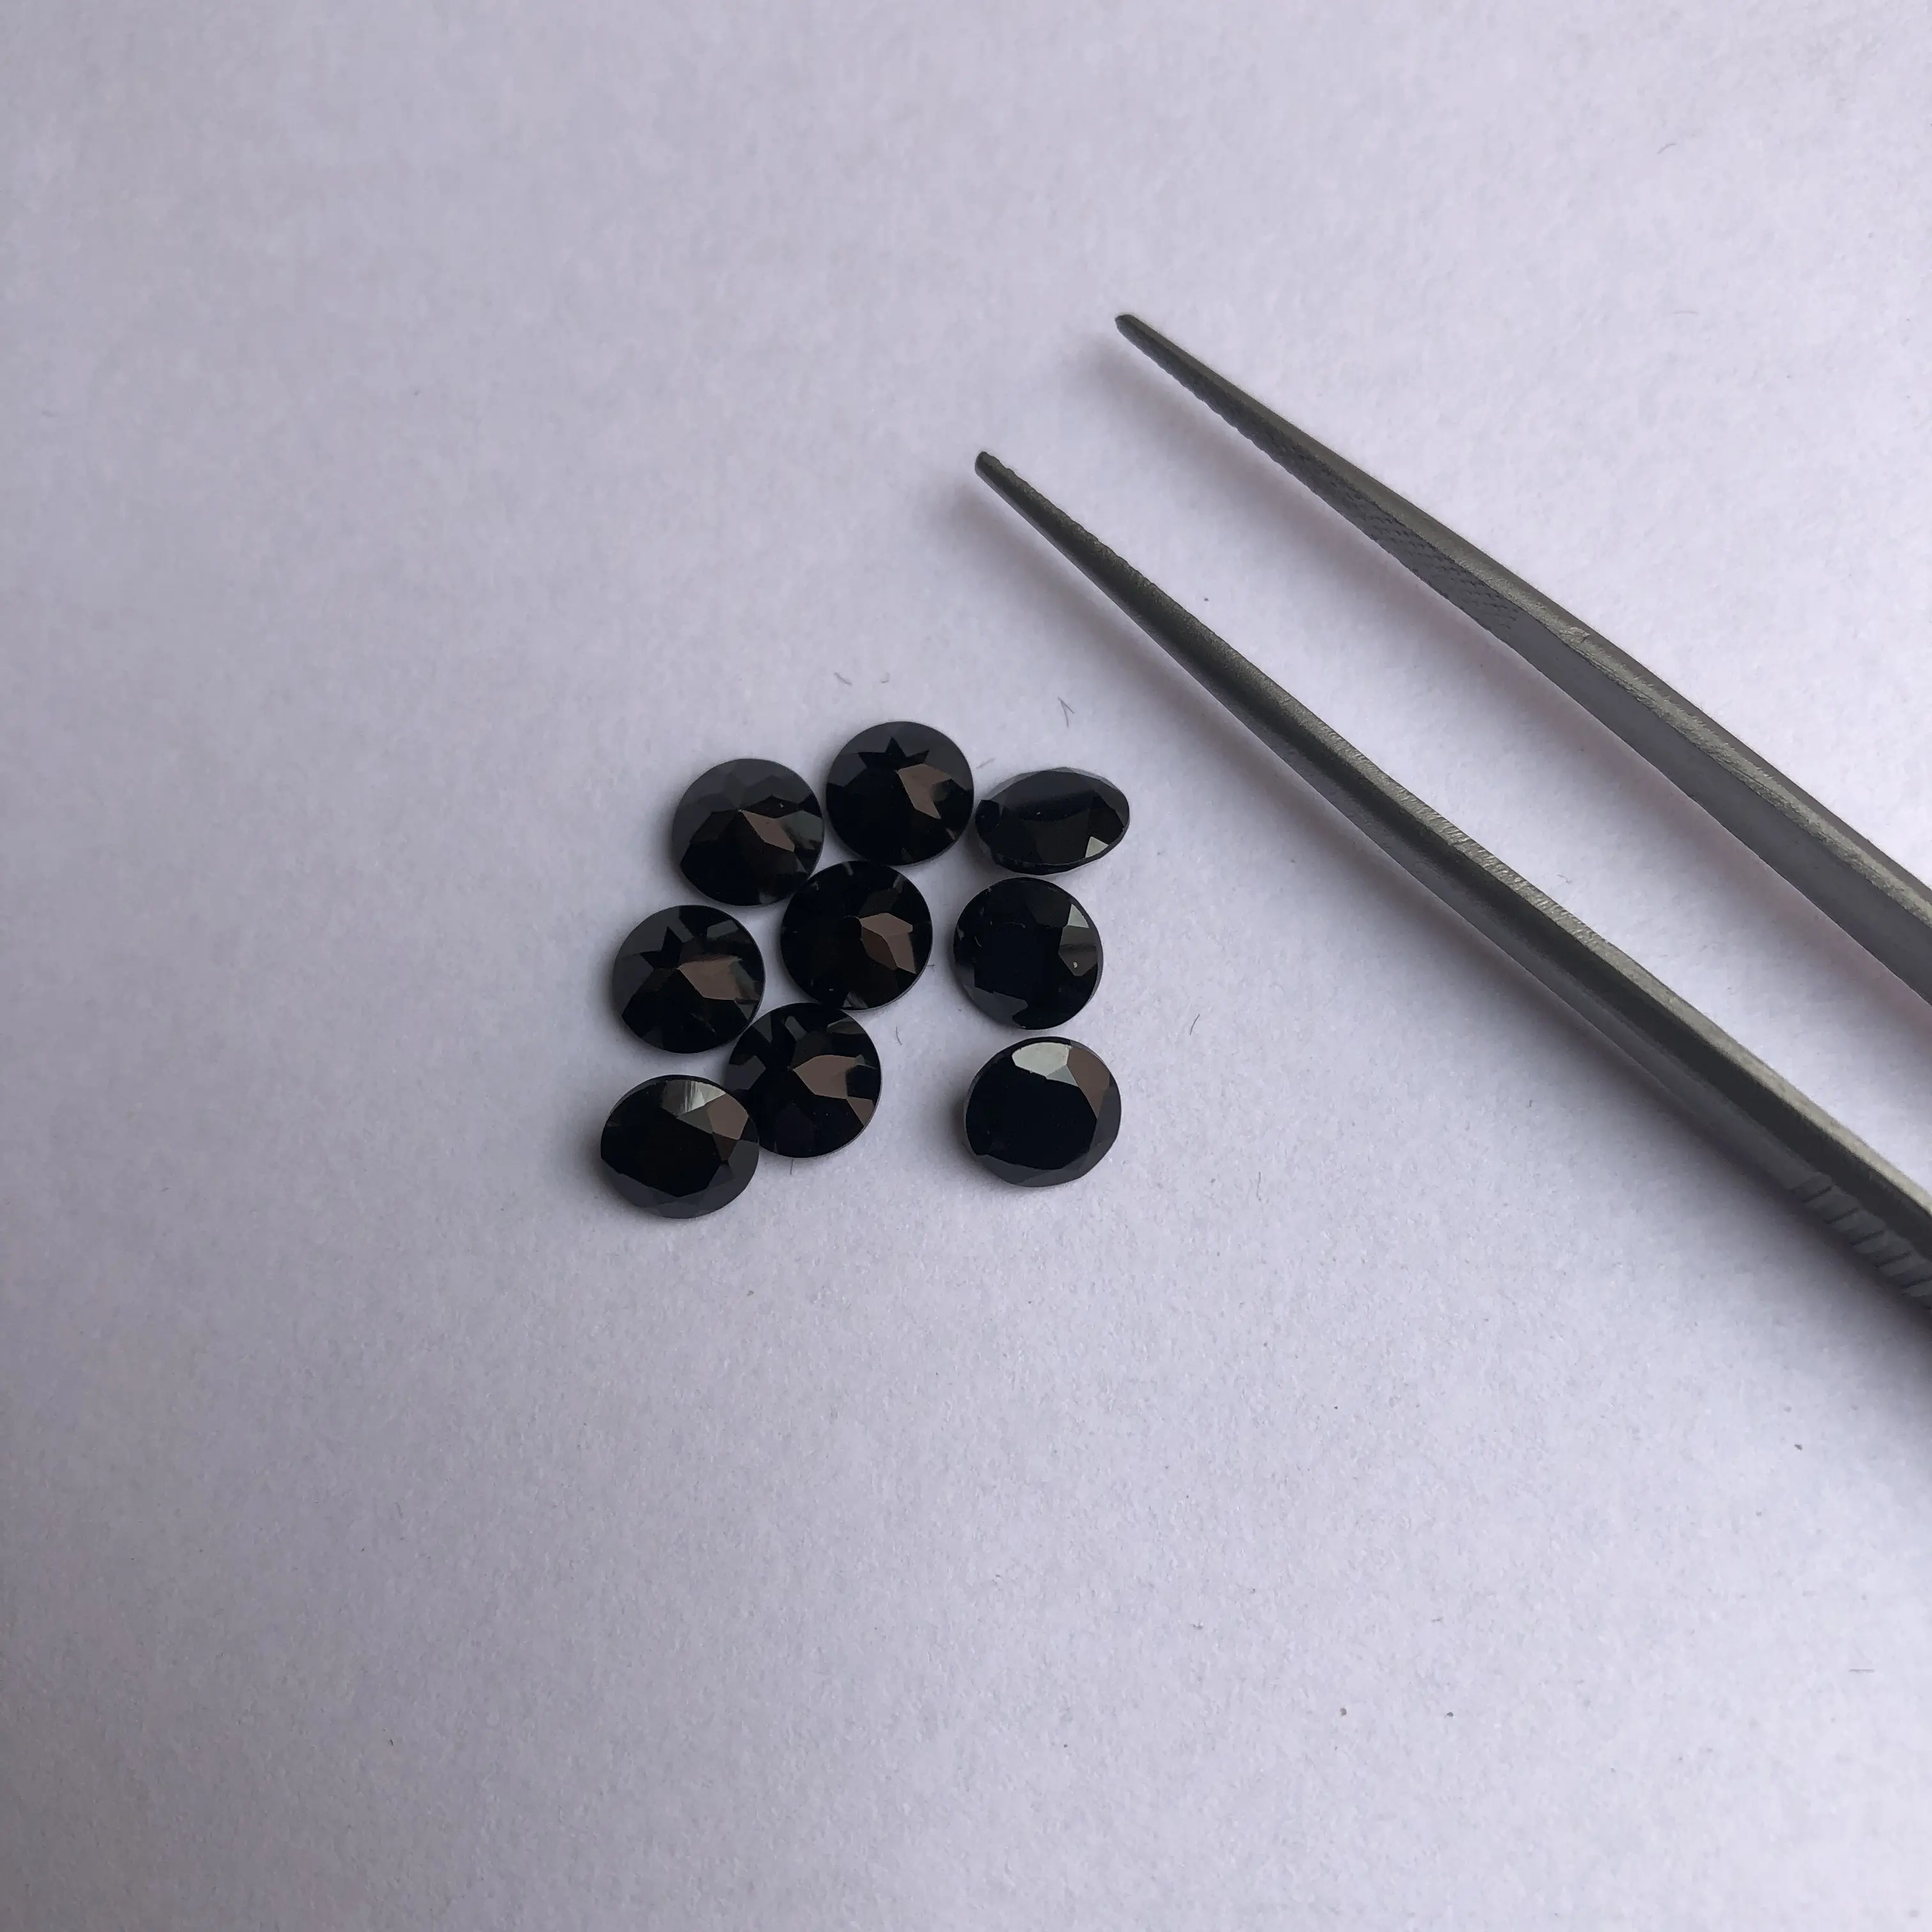 3.5mm Natural Black Spinel Semi Precious Faceted Round Wholesale Loose Gemstones Hot Bulk Deal Supplier Buy Now Closeout Deals